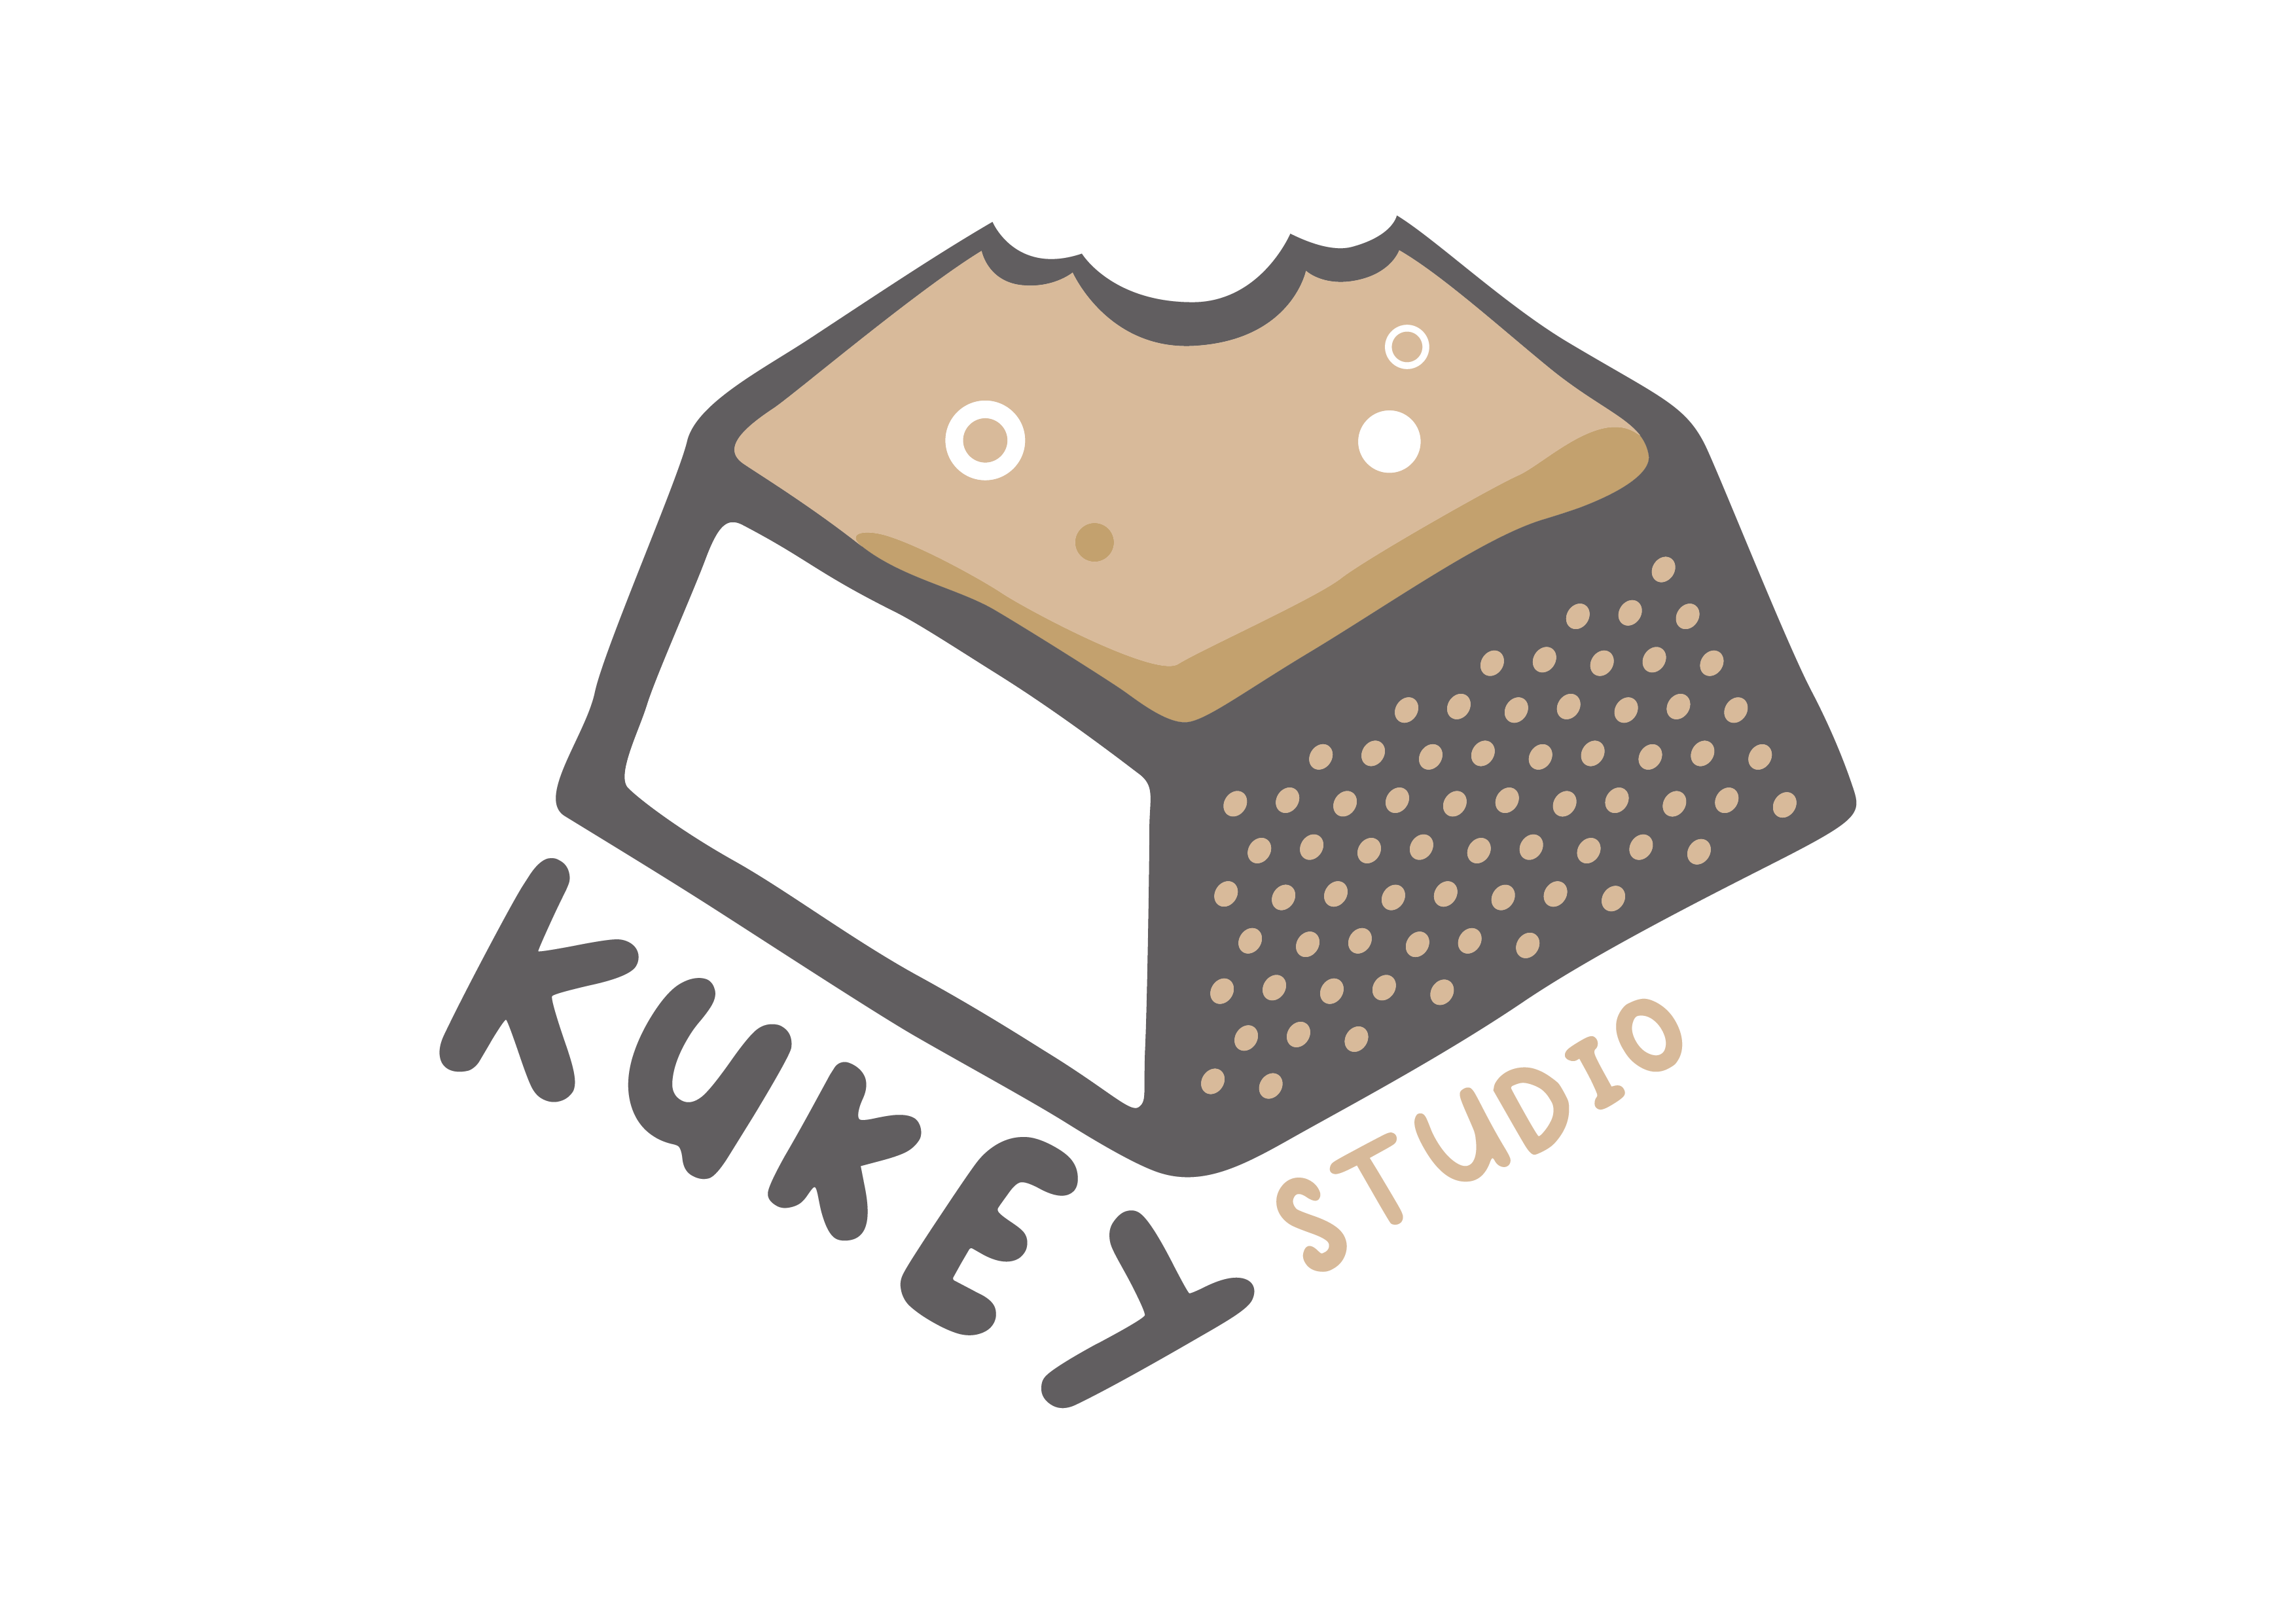 A bite of kukey for everyone!